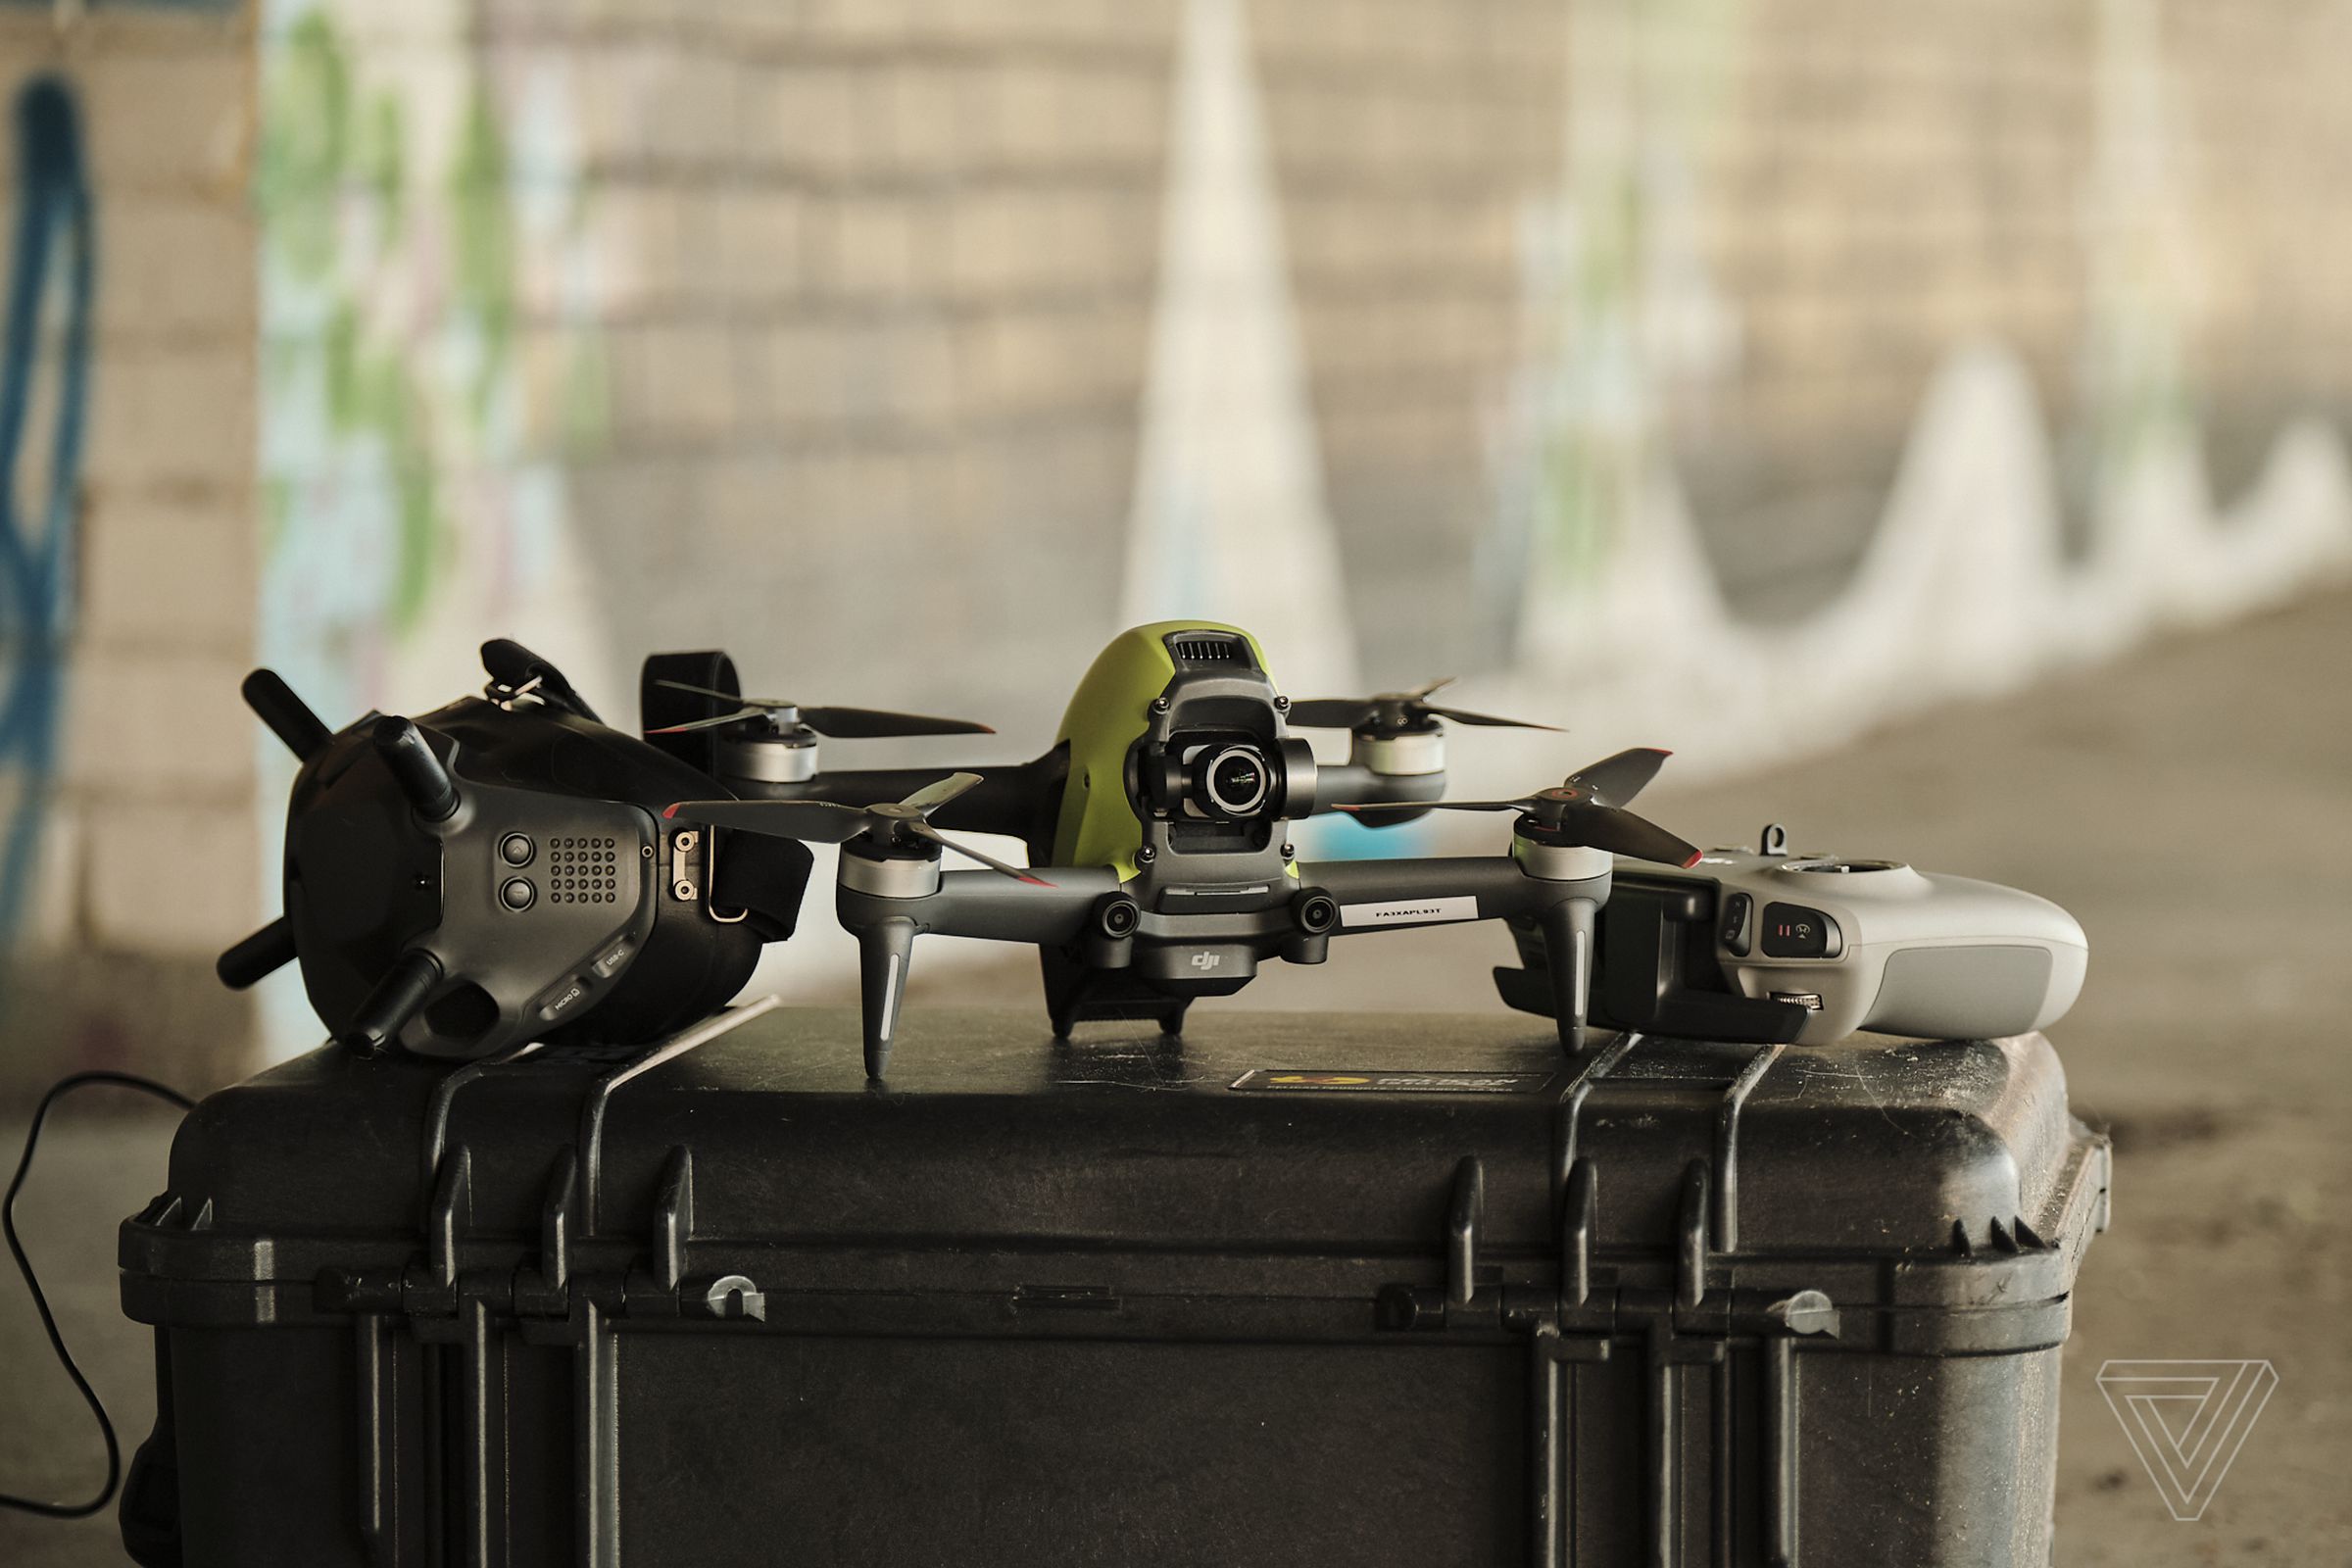 The FPV kit comes with the drone, goggles, and controller.